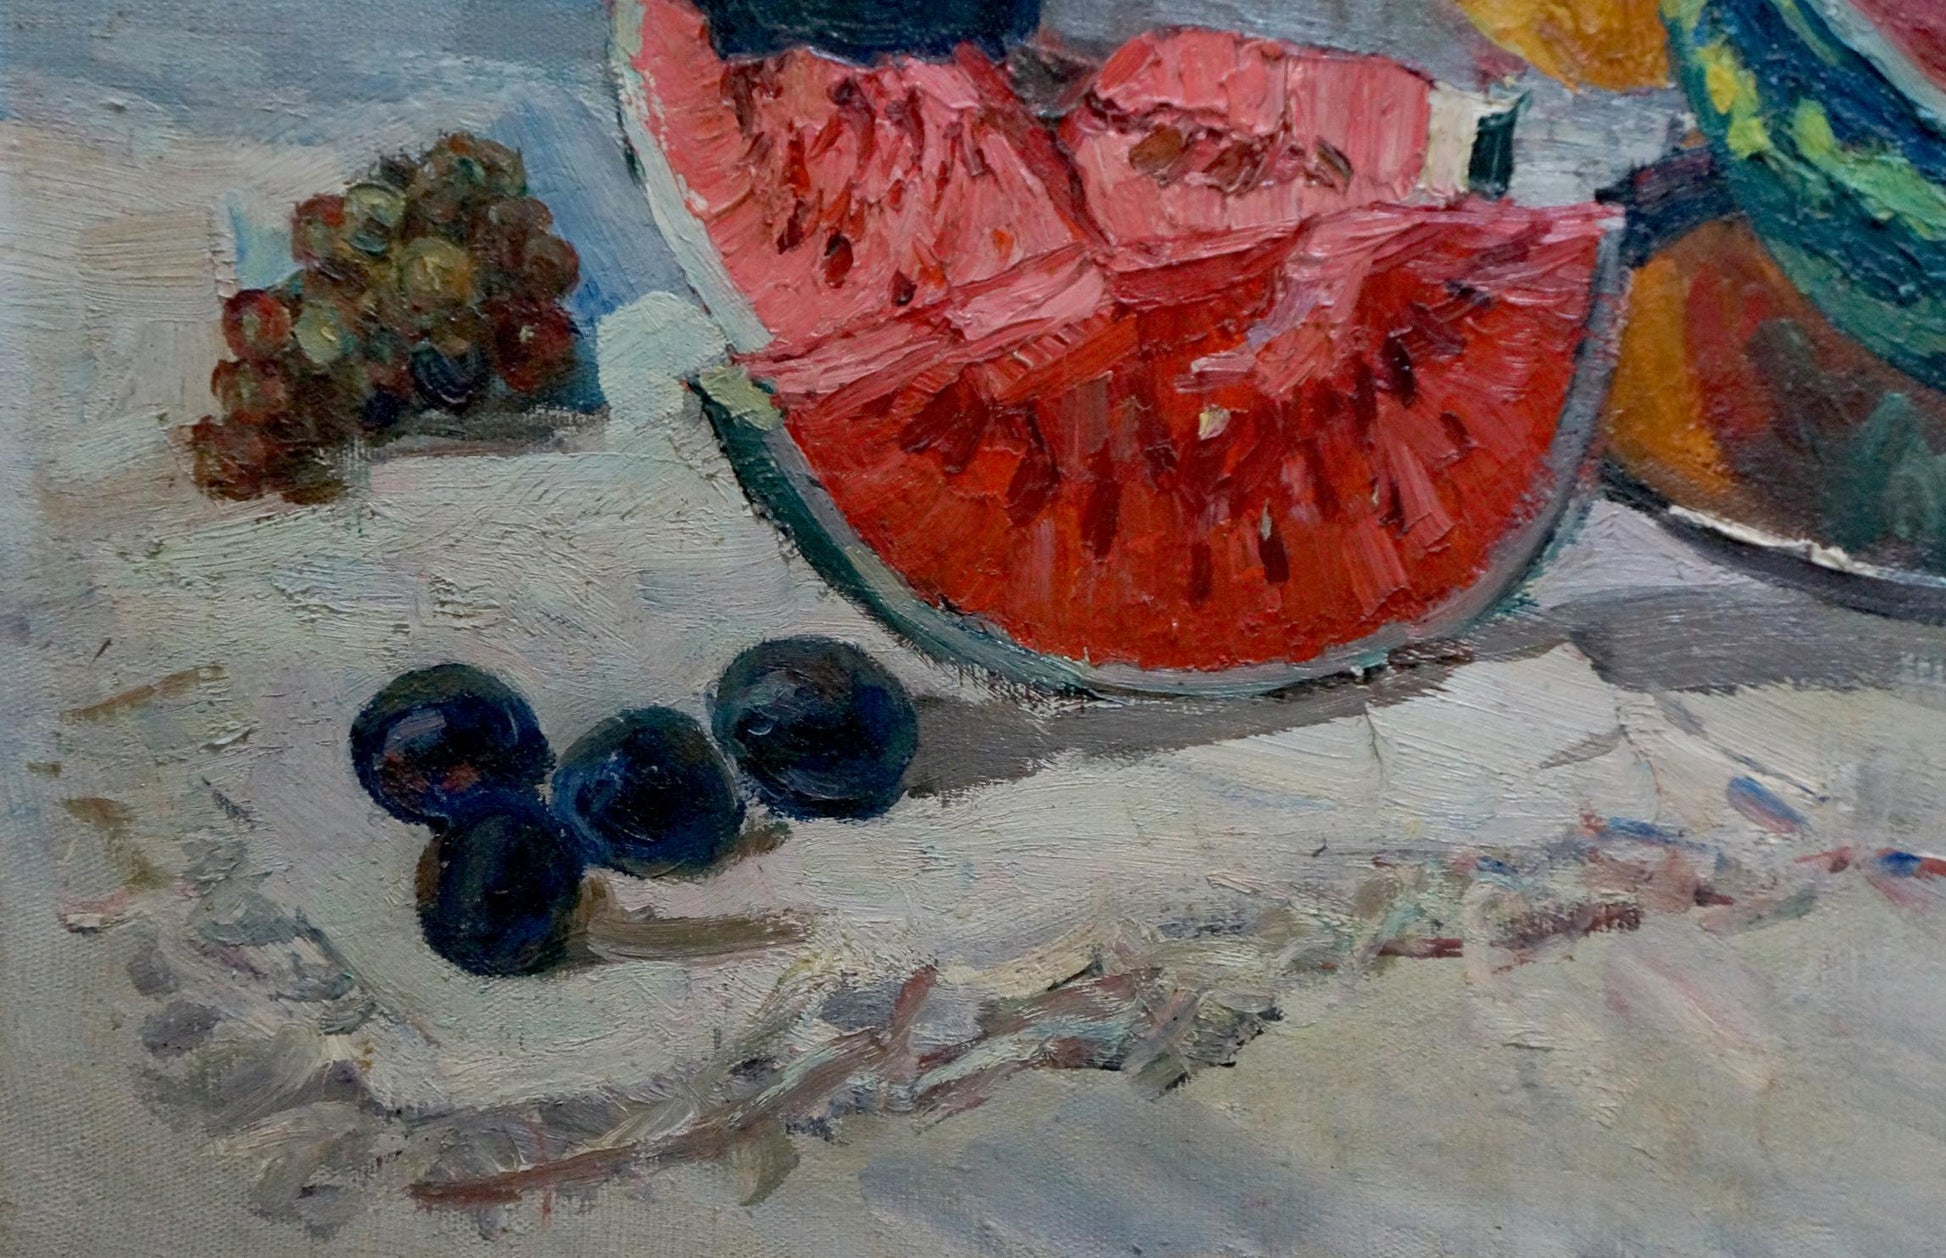 Still Life with Watermelon by Efim Aleksandrovich Kerzhner, an oil painting